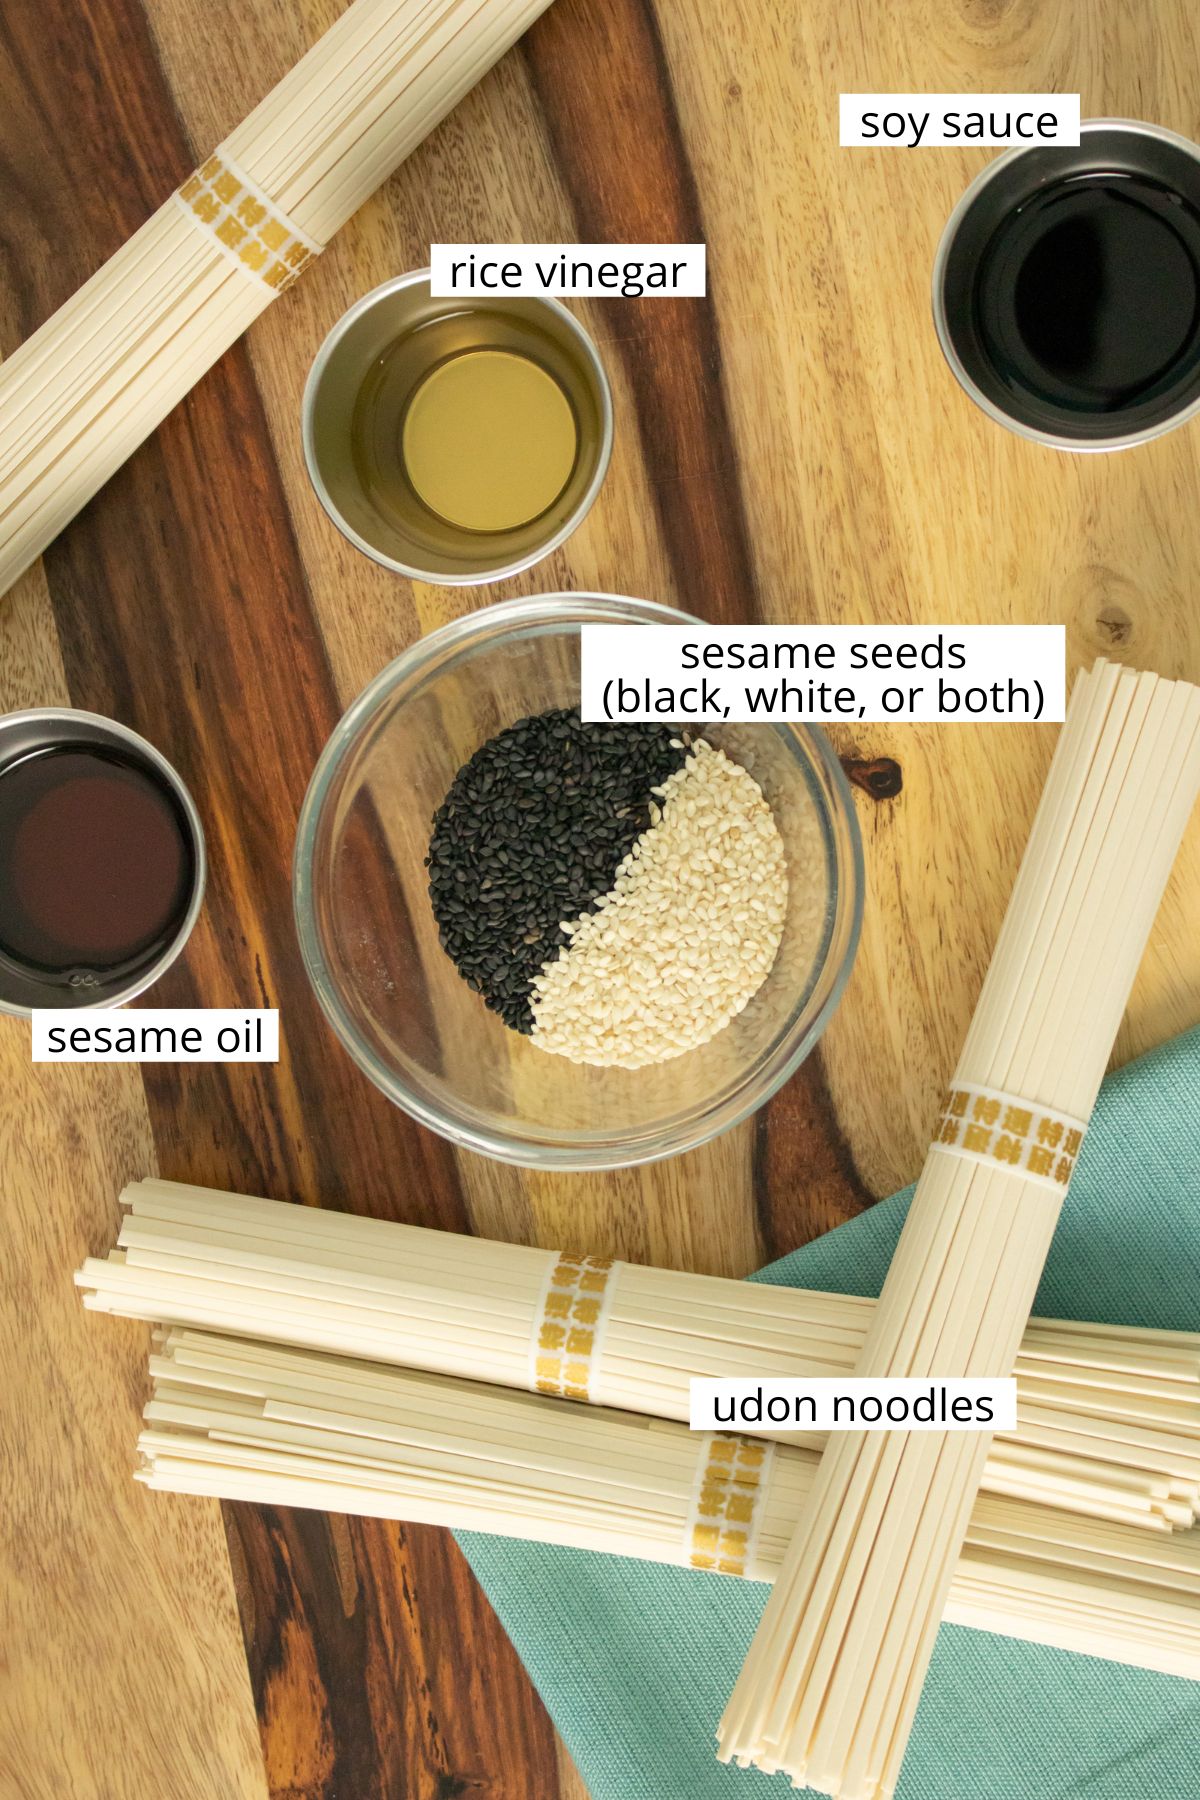 udon noodles on a wooden cutting board with ramekins of sesame seeds, sesame oil, rice vinegar, and soy sauce, all labeled with text